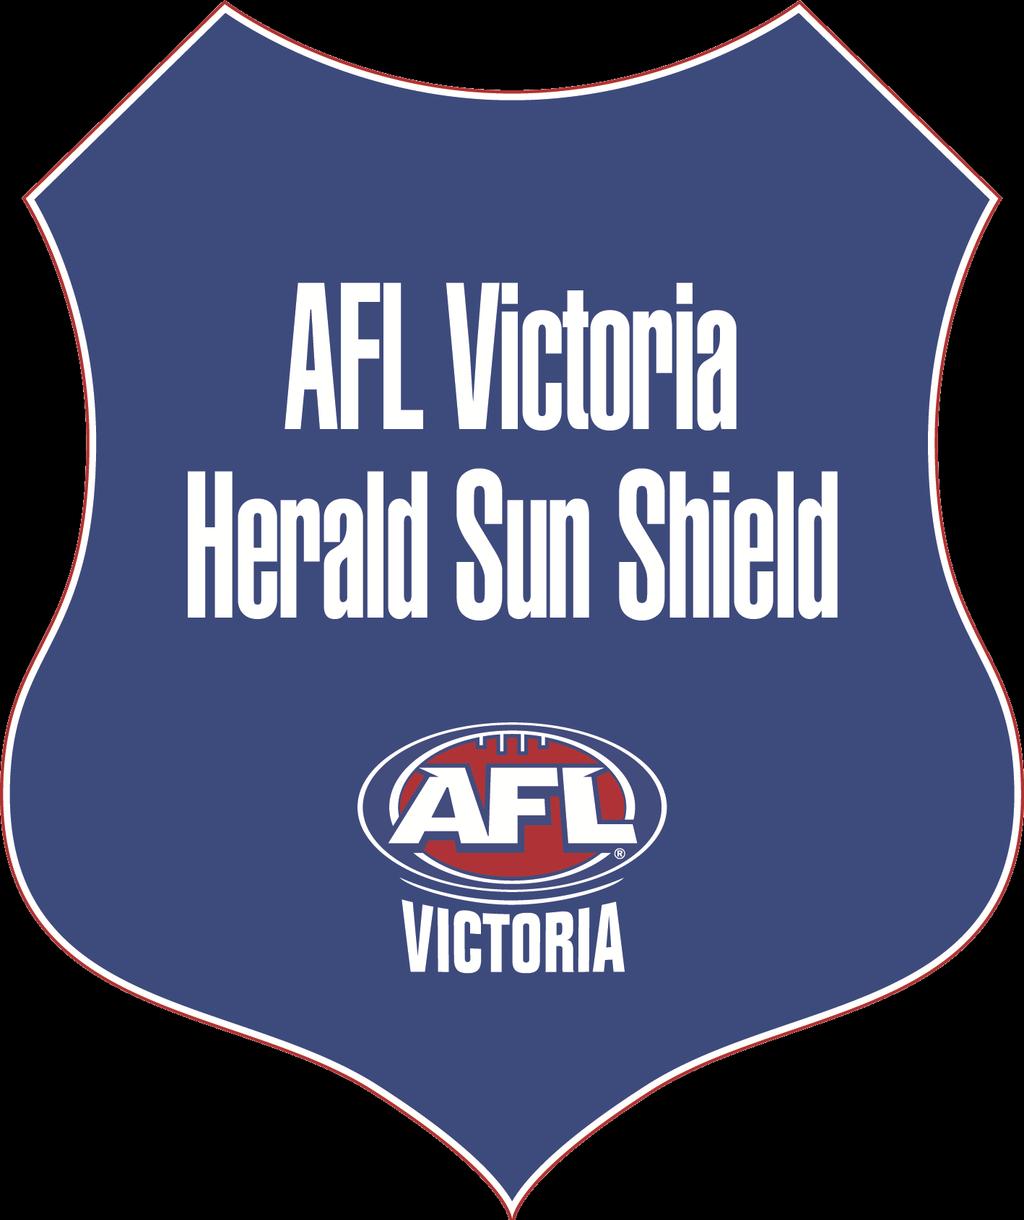 HERALD SUN SHIELD COMPETITION GUIDELINES